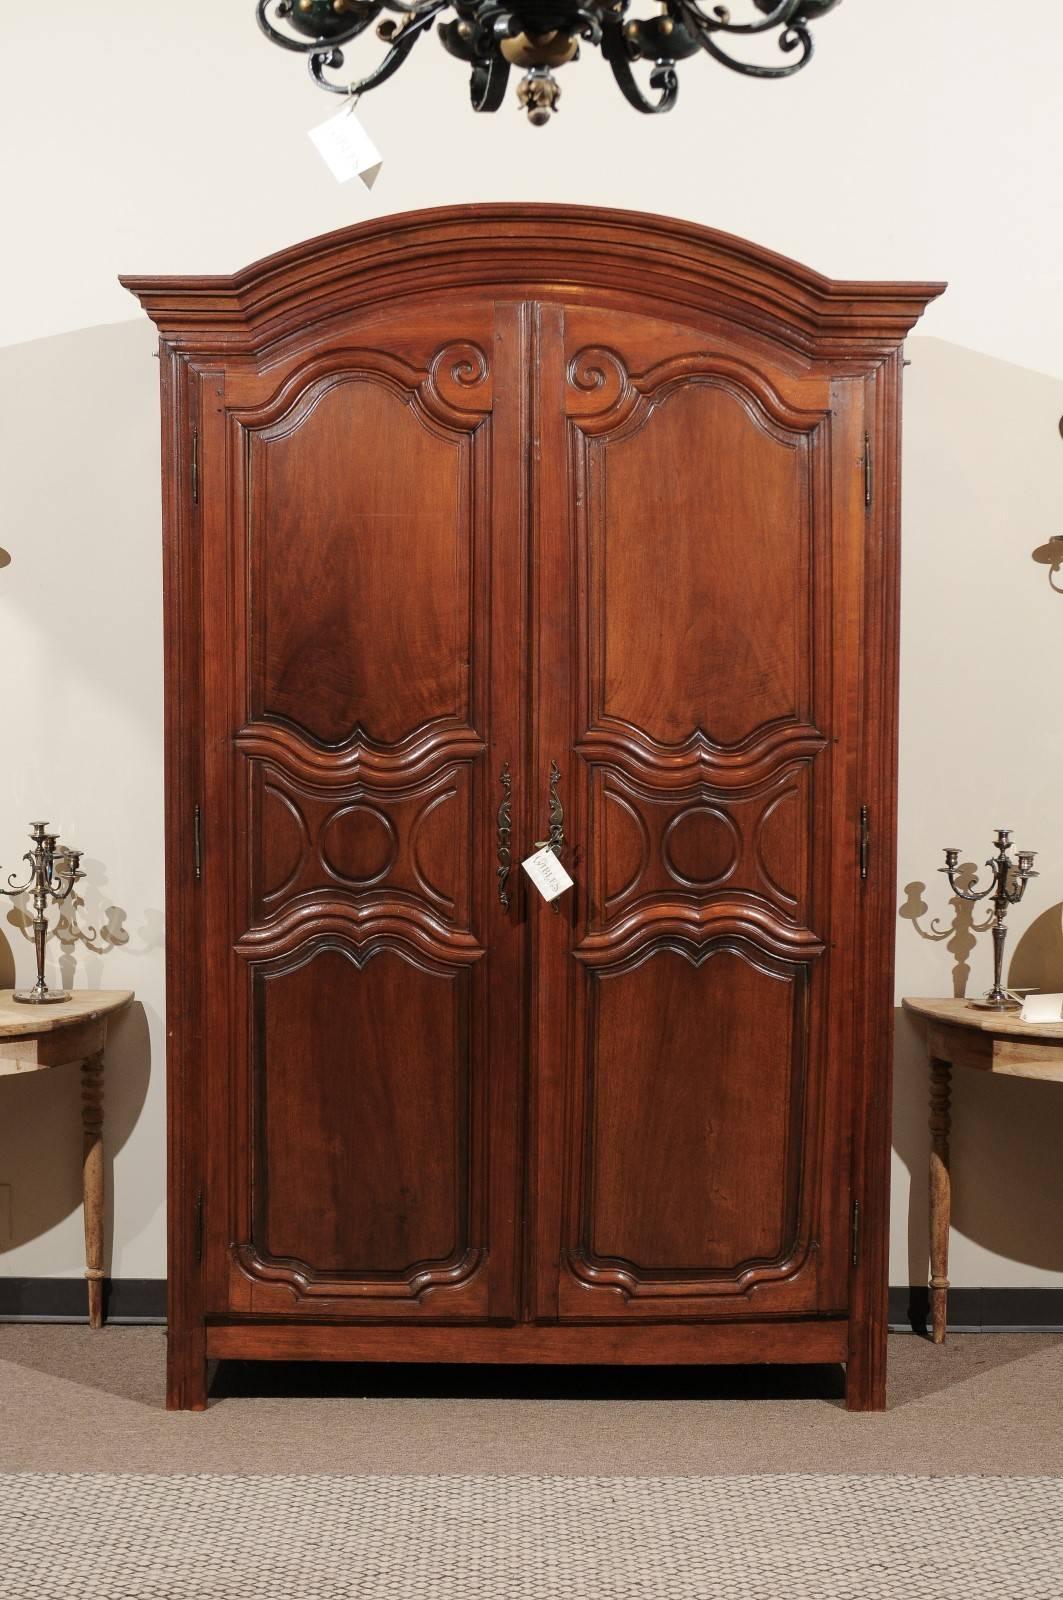 18th century walnut armoire from Paris.

This large, handsome armoire is stamped with Criard, the name of a large family of ebenistes from Paris during the mid to late 18th century. It is beautifully crafted and has a lovely patina.

 